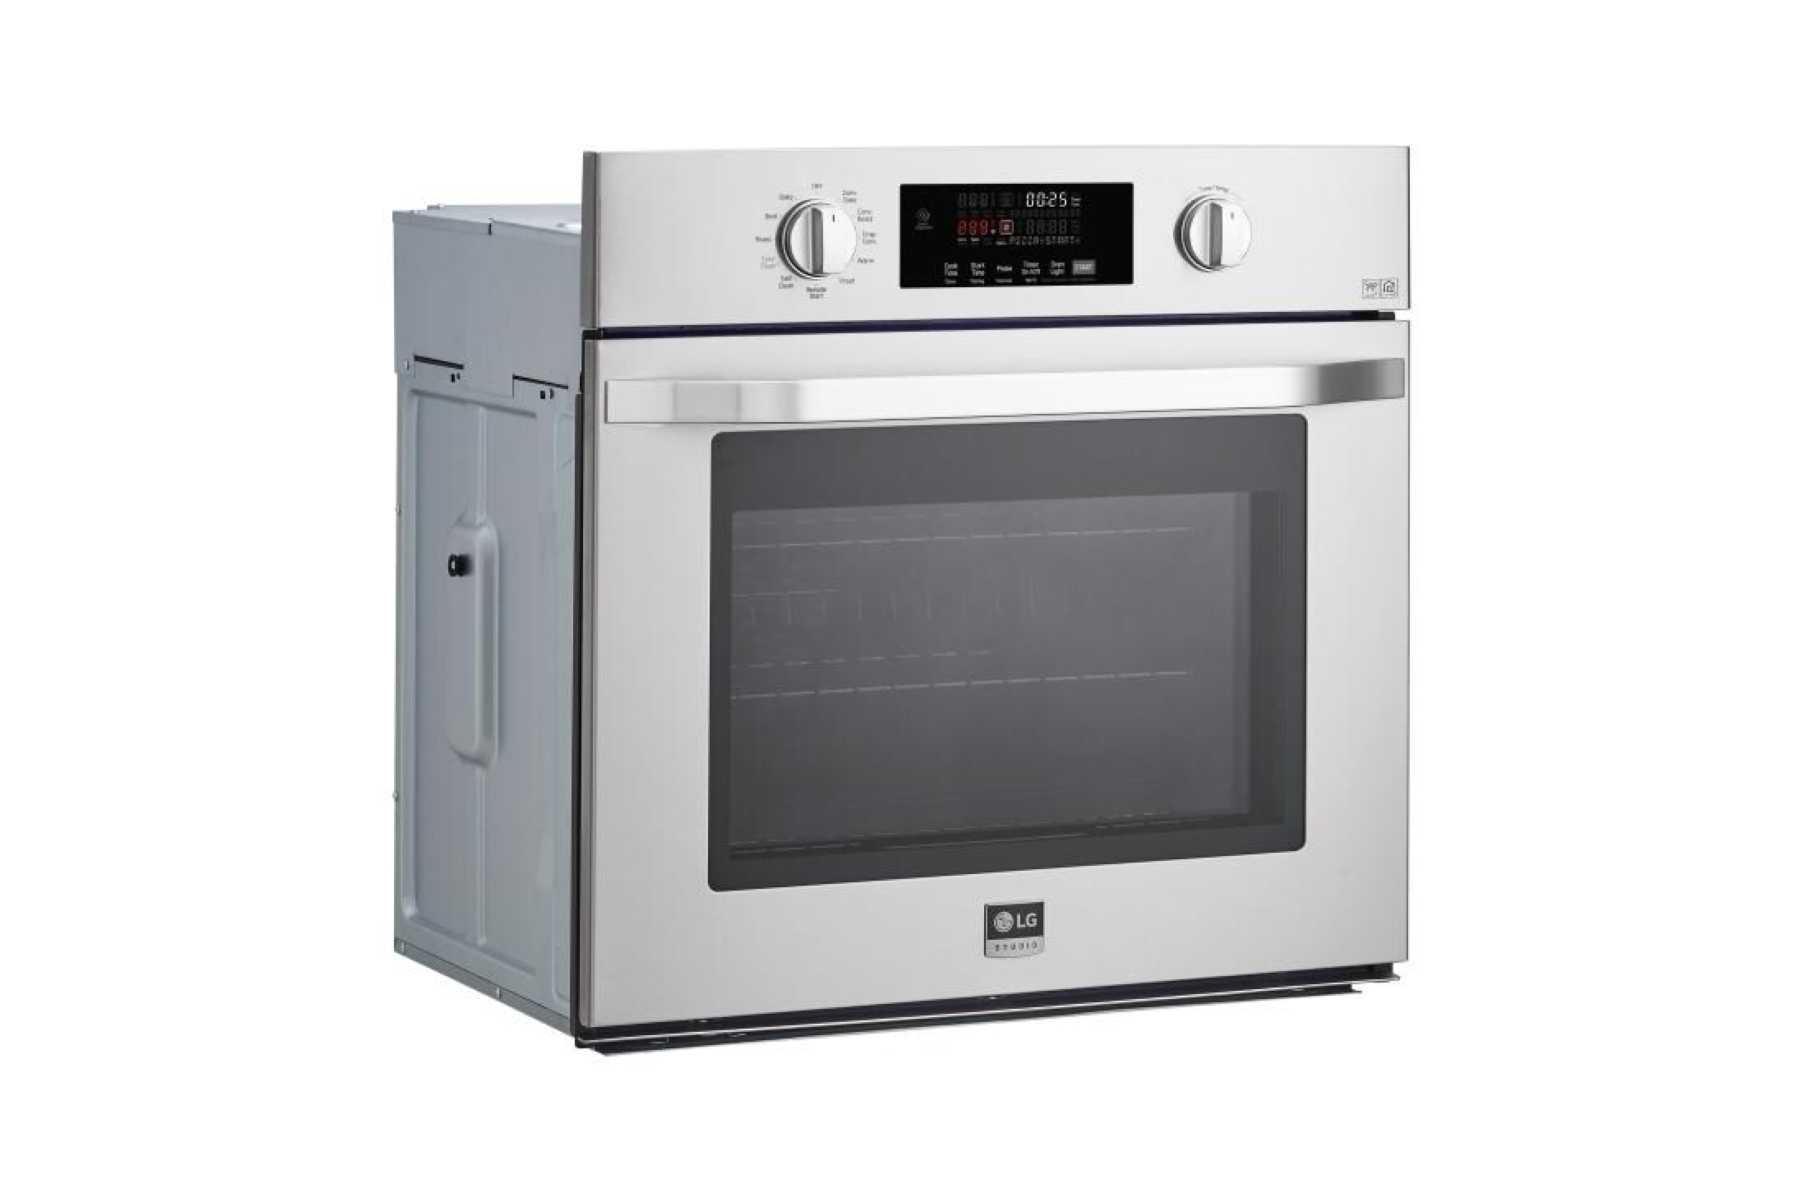 How To Fix The Error Code F-24 For LG Oven